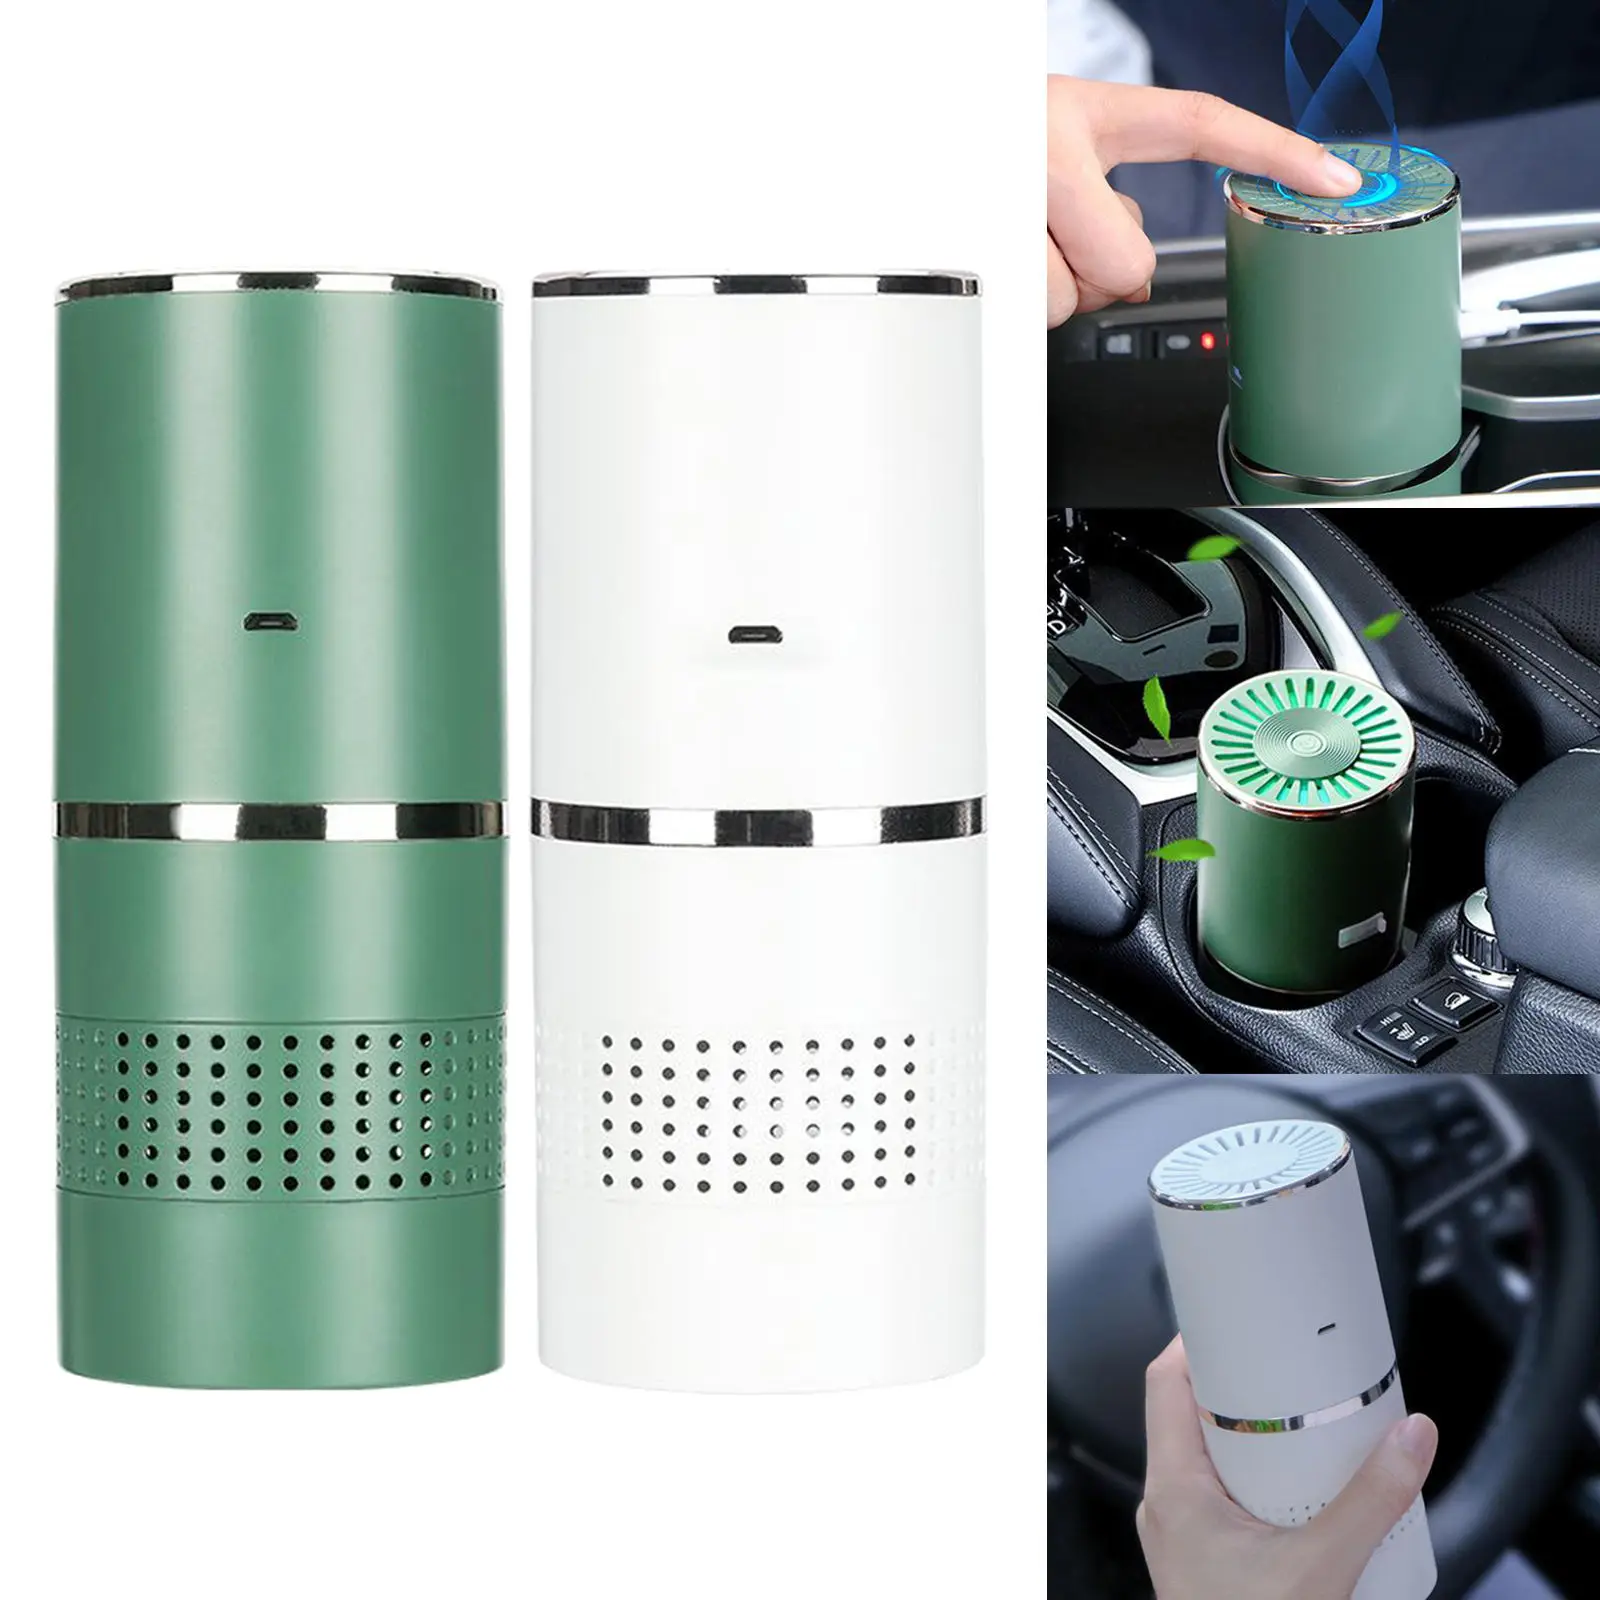 Car Air Purifier Portable Air Cleaner Purifier Remove Dust for Home Reduce Odor from Mold Smoke Pollen